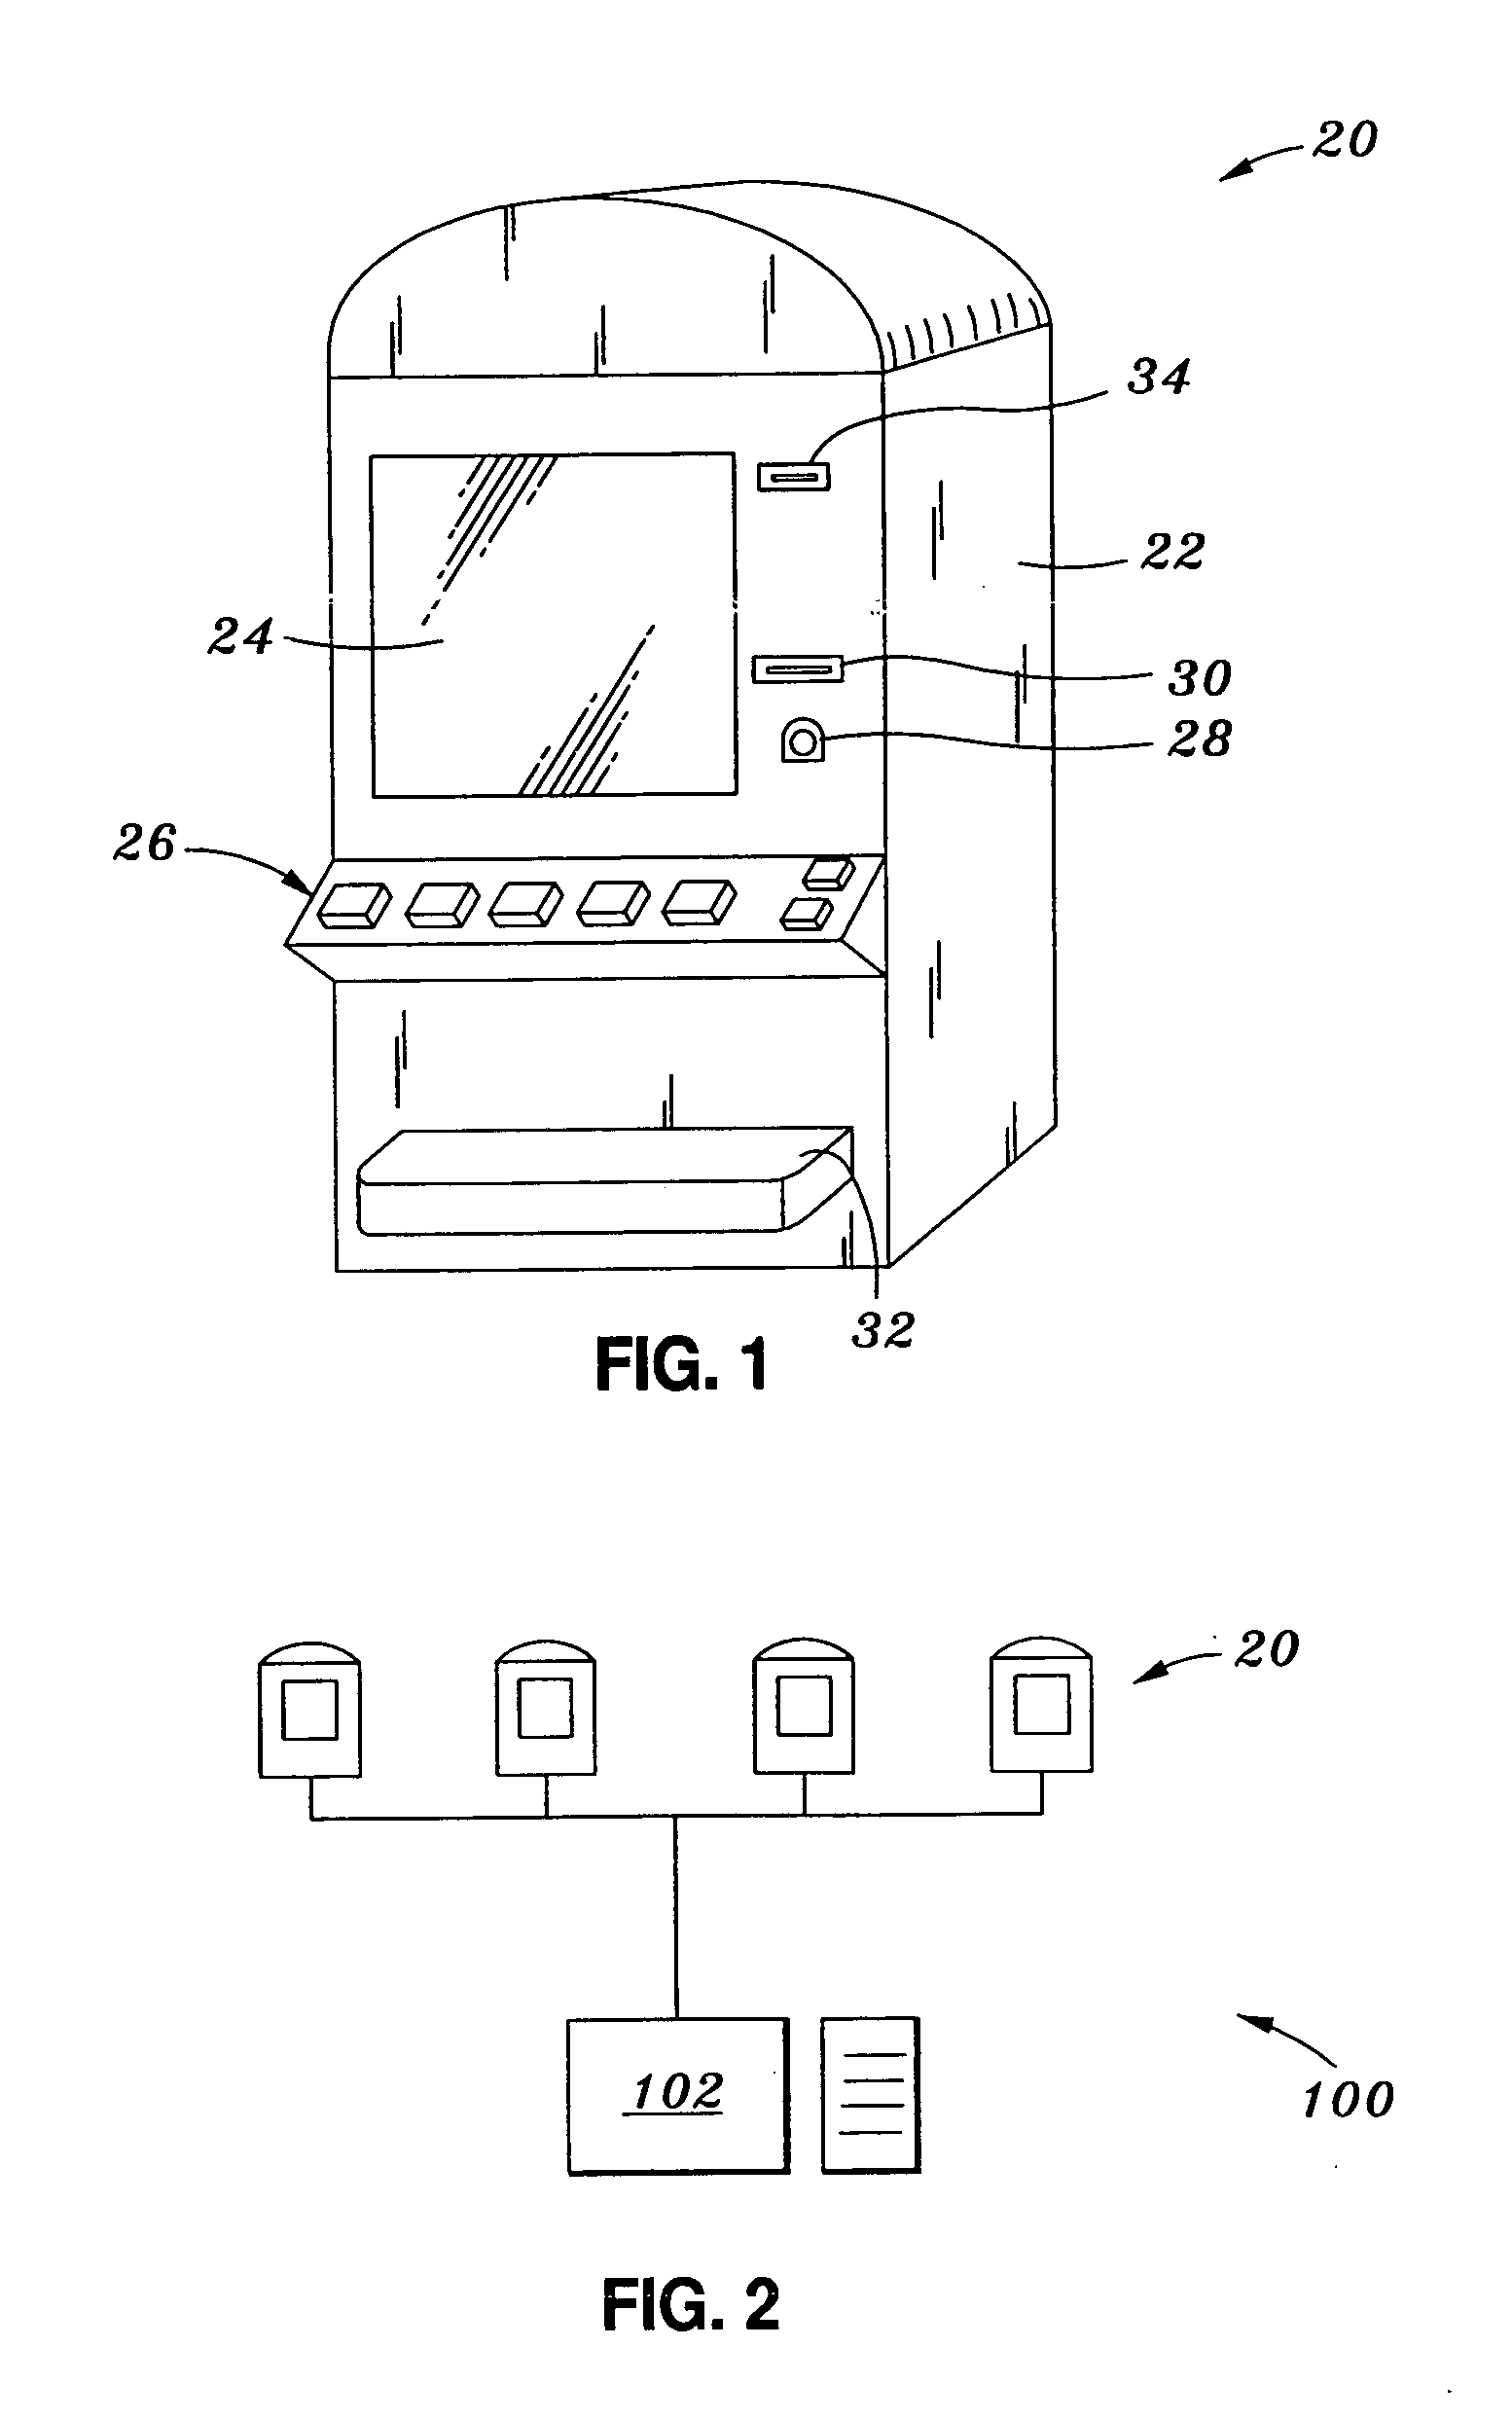 Method and apparatus for awarding wins for game play